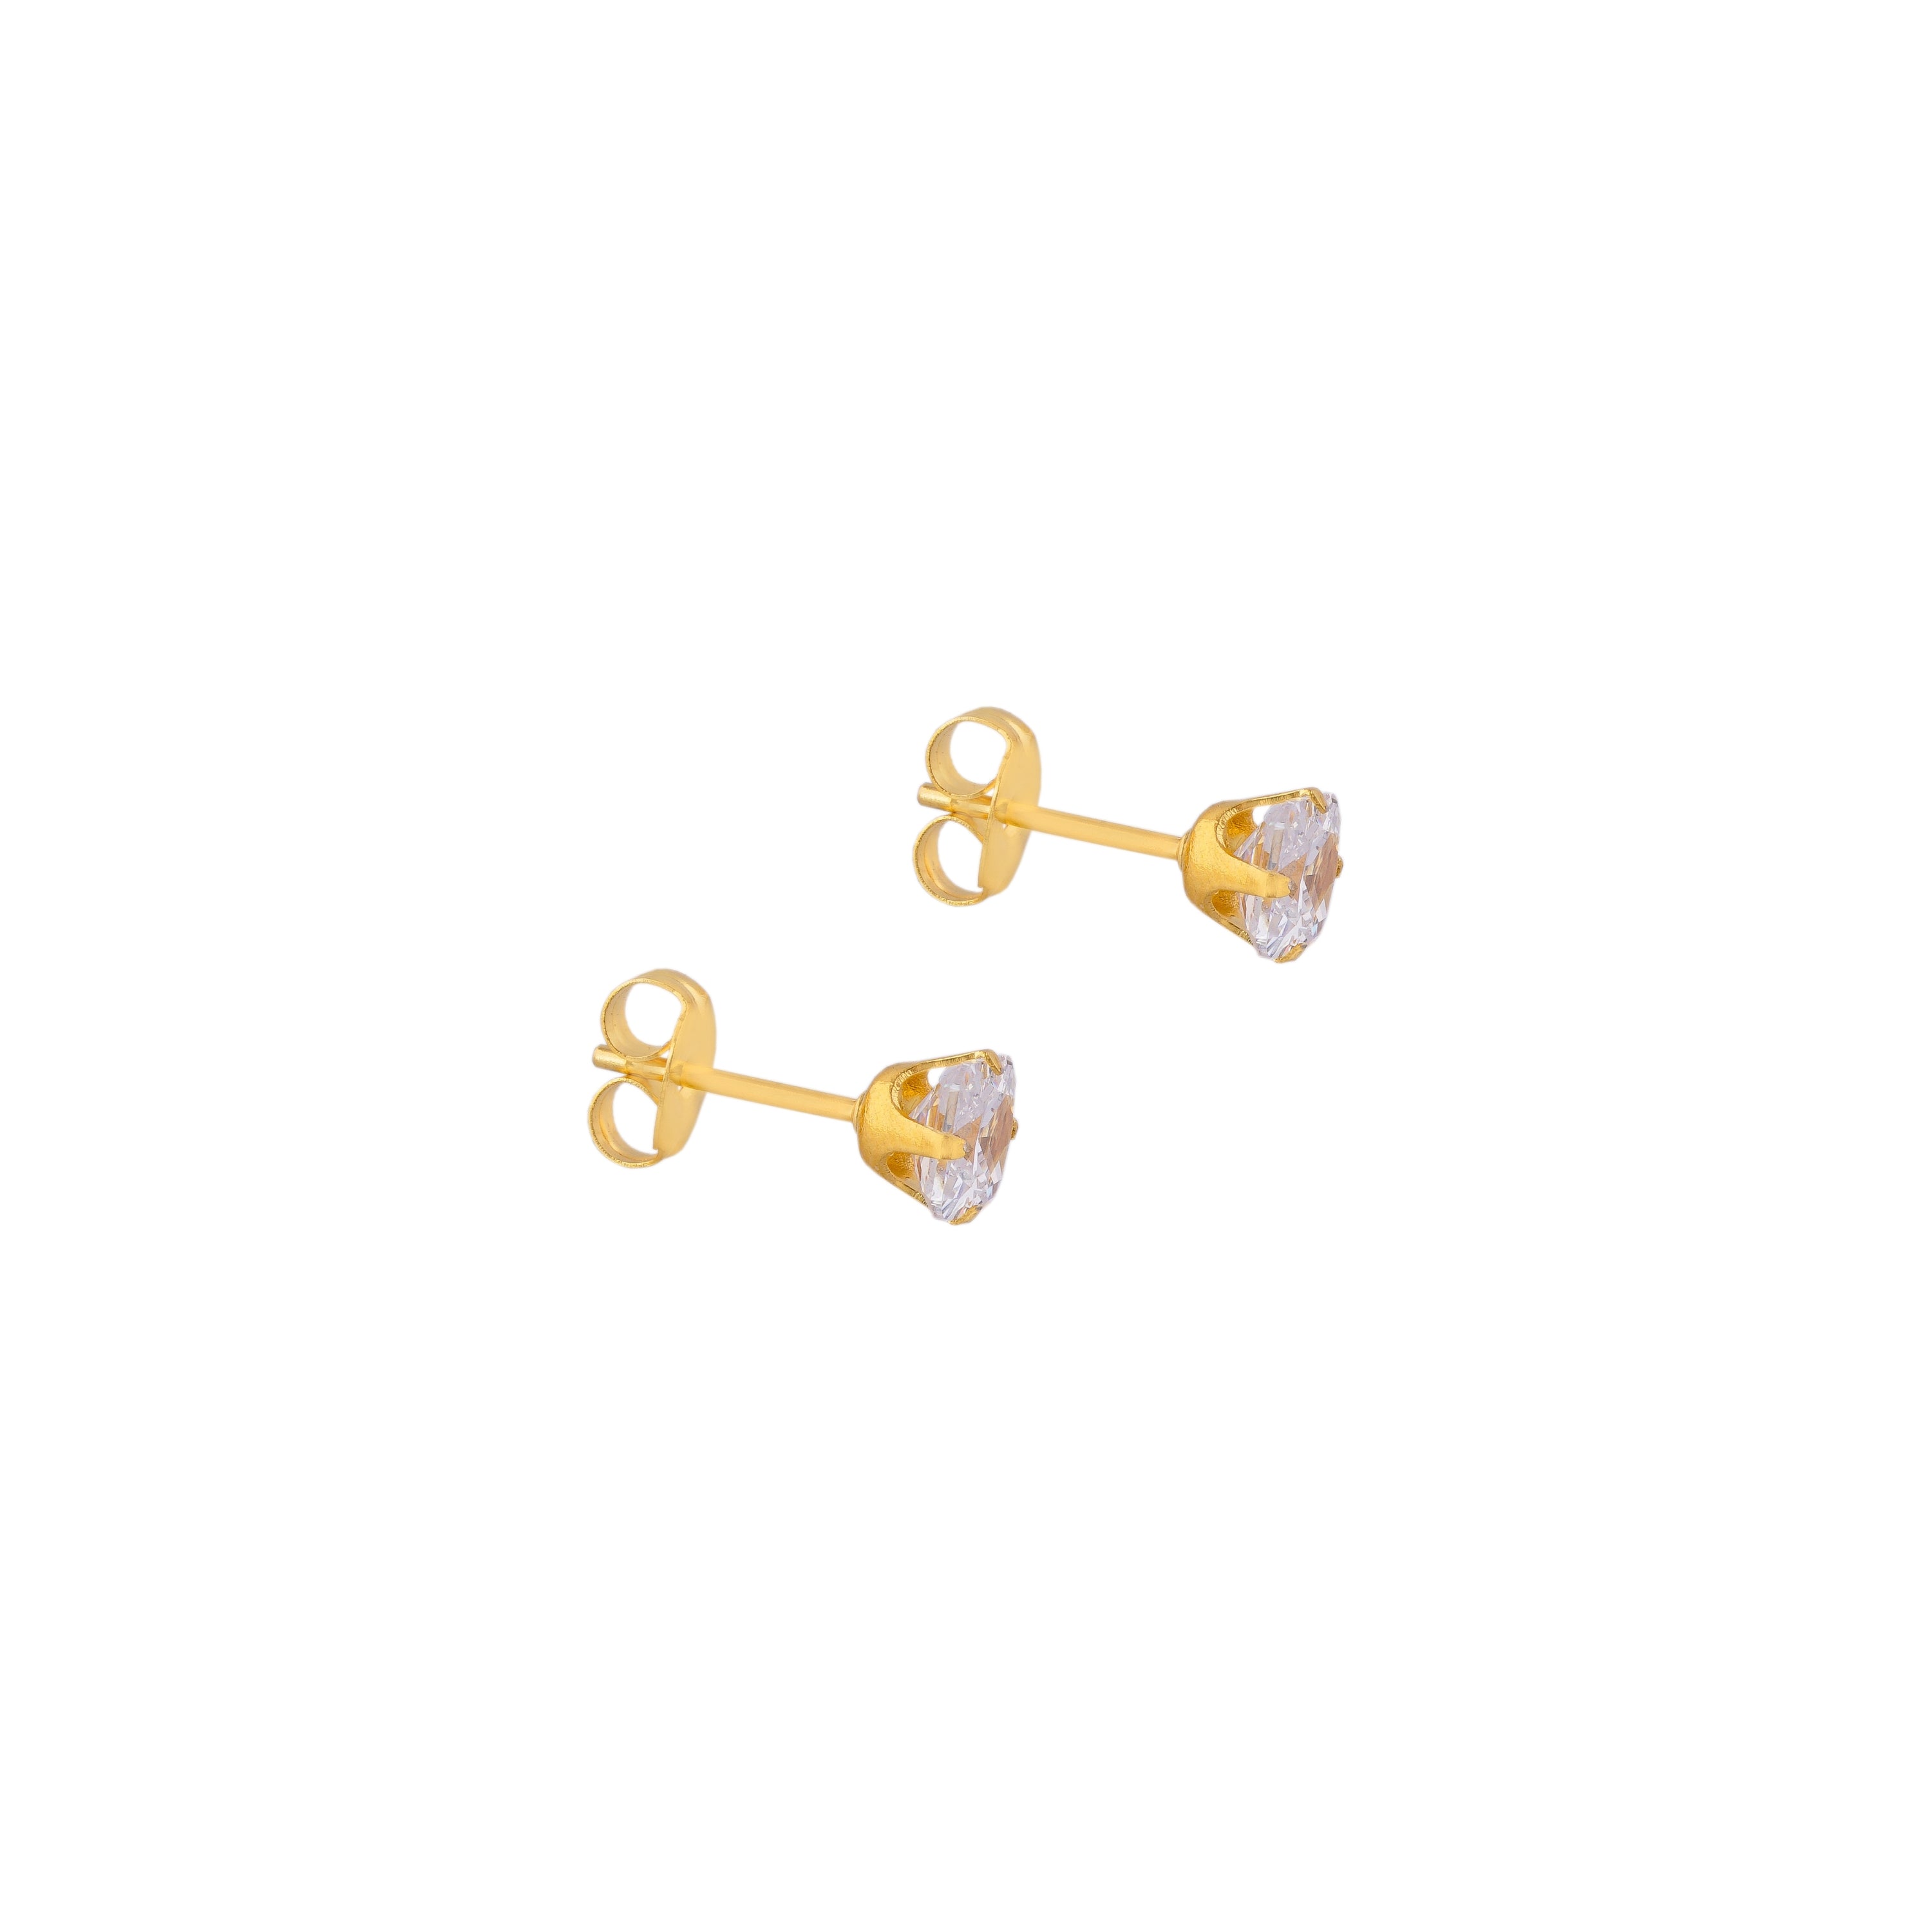 5X5MM Cubic Zirconia Princess Cut 24K Pure Gold Plated Ear Studs | MADE IN USA | Ideal for everyday wear